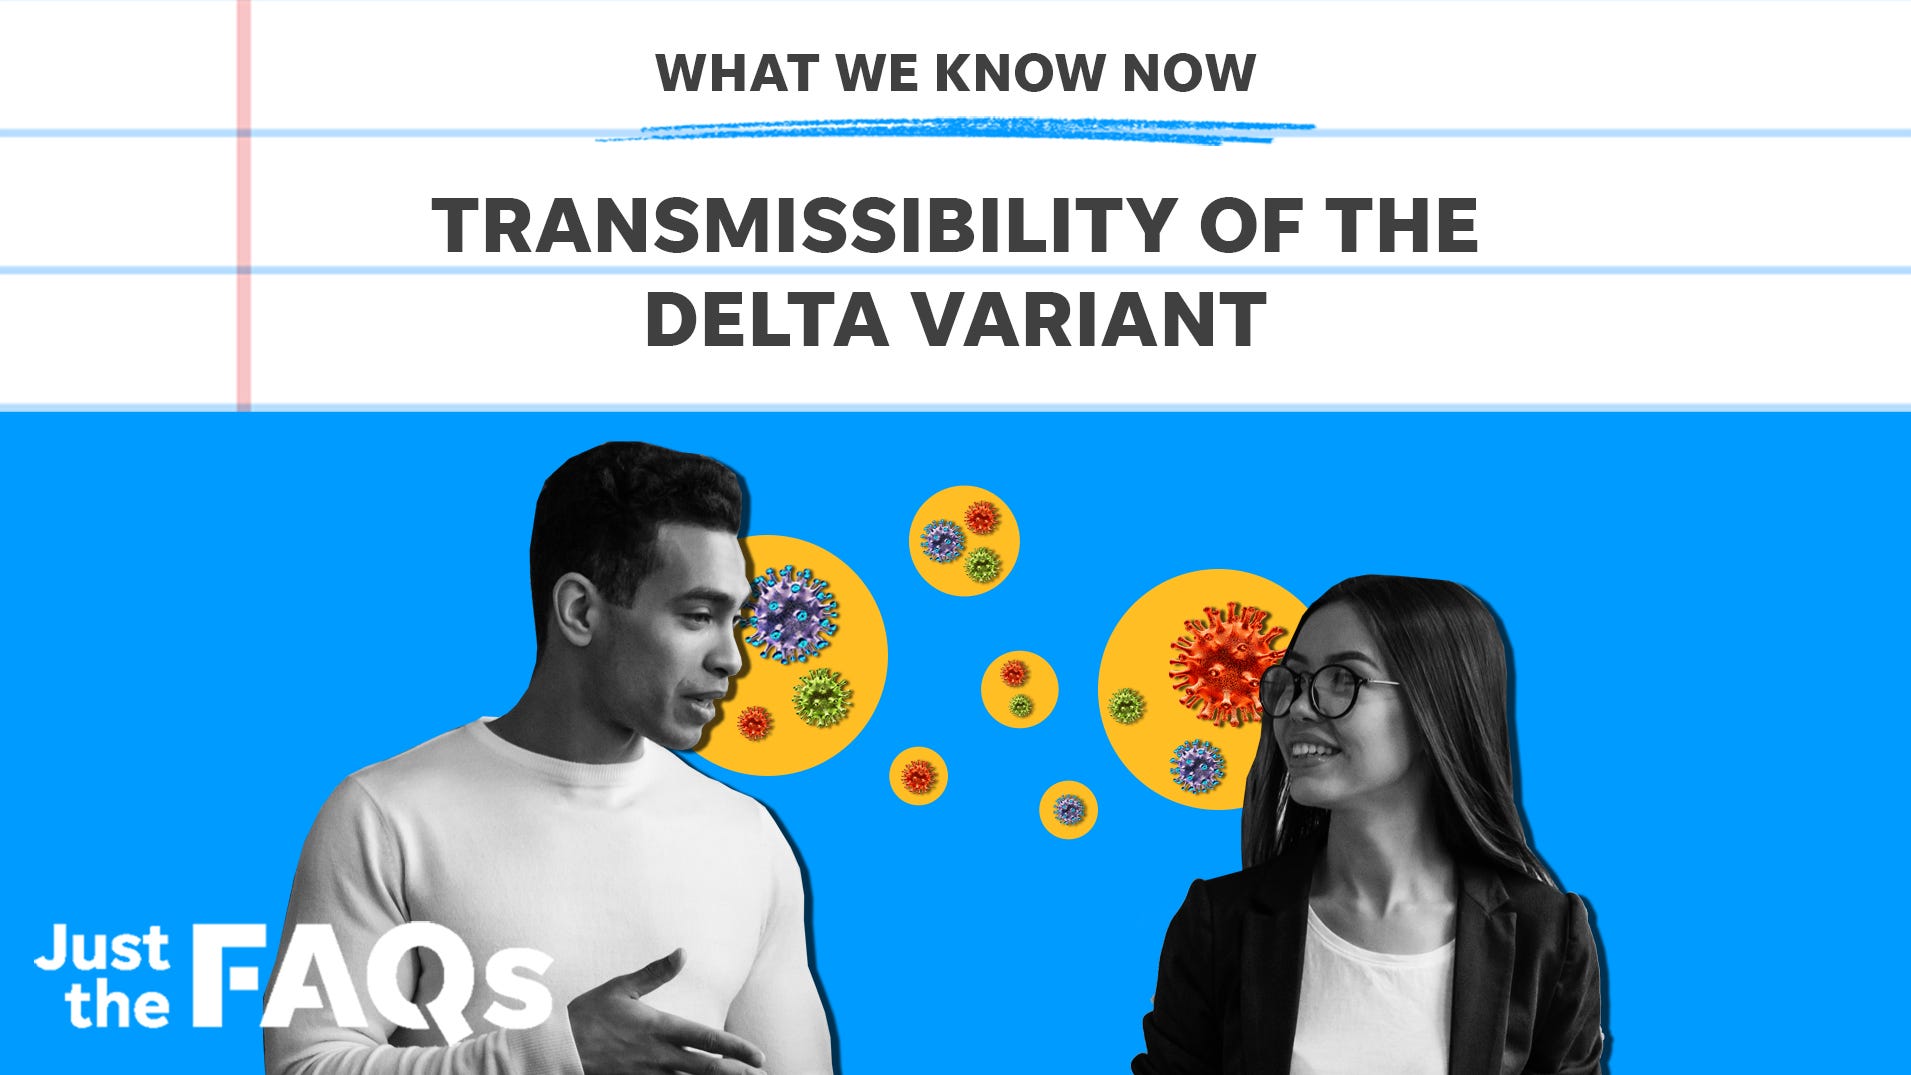 High transmissibility of the Delta variant: Here’s why it’s so contagious | Just the FAQs